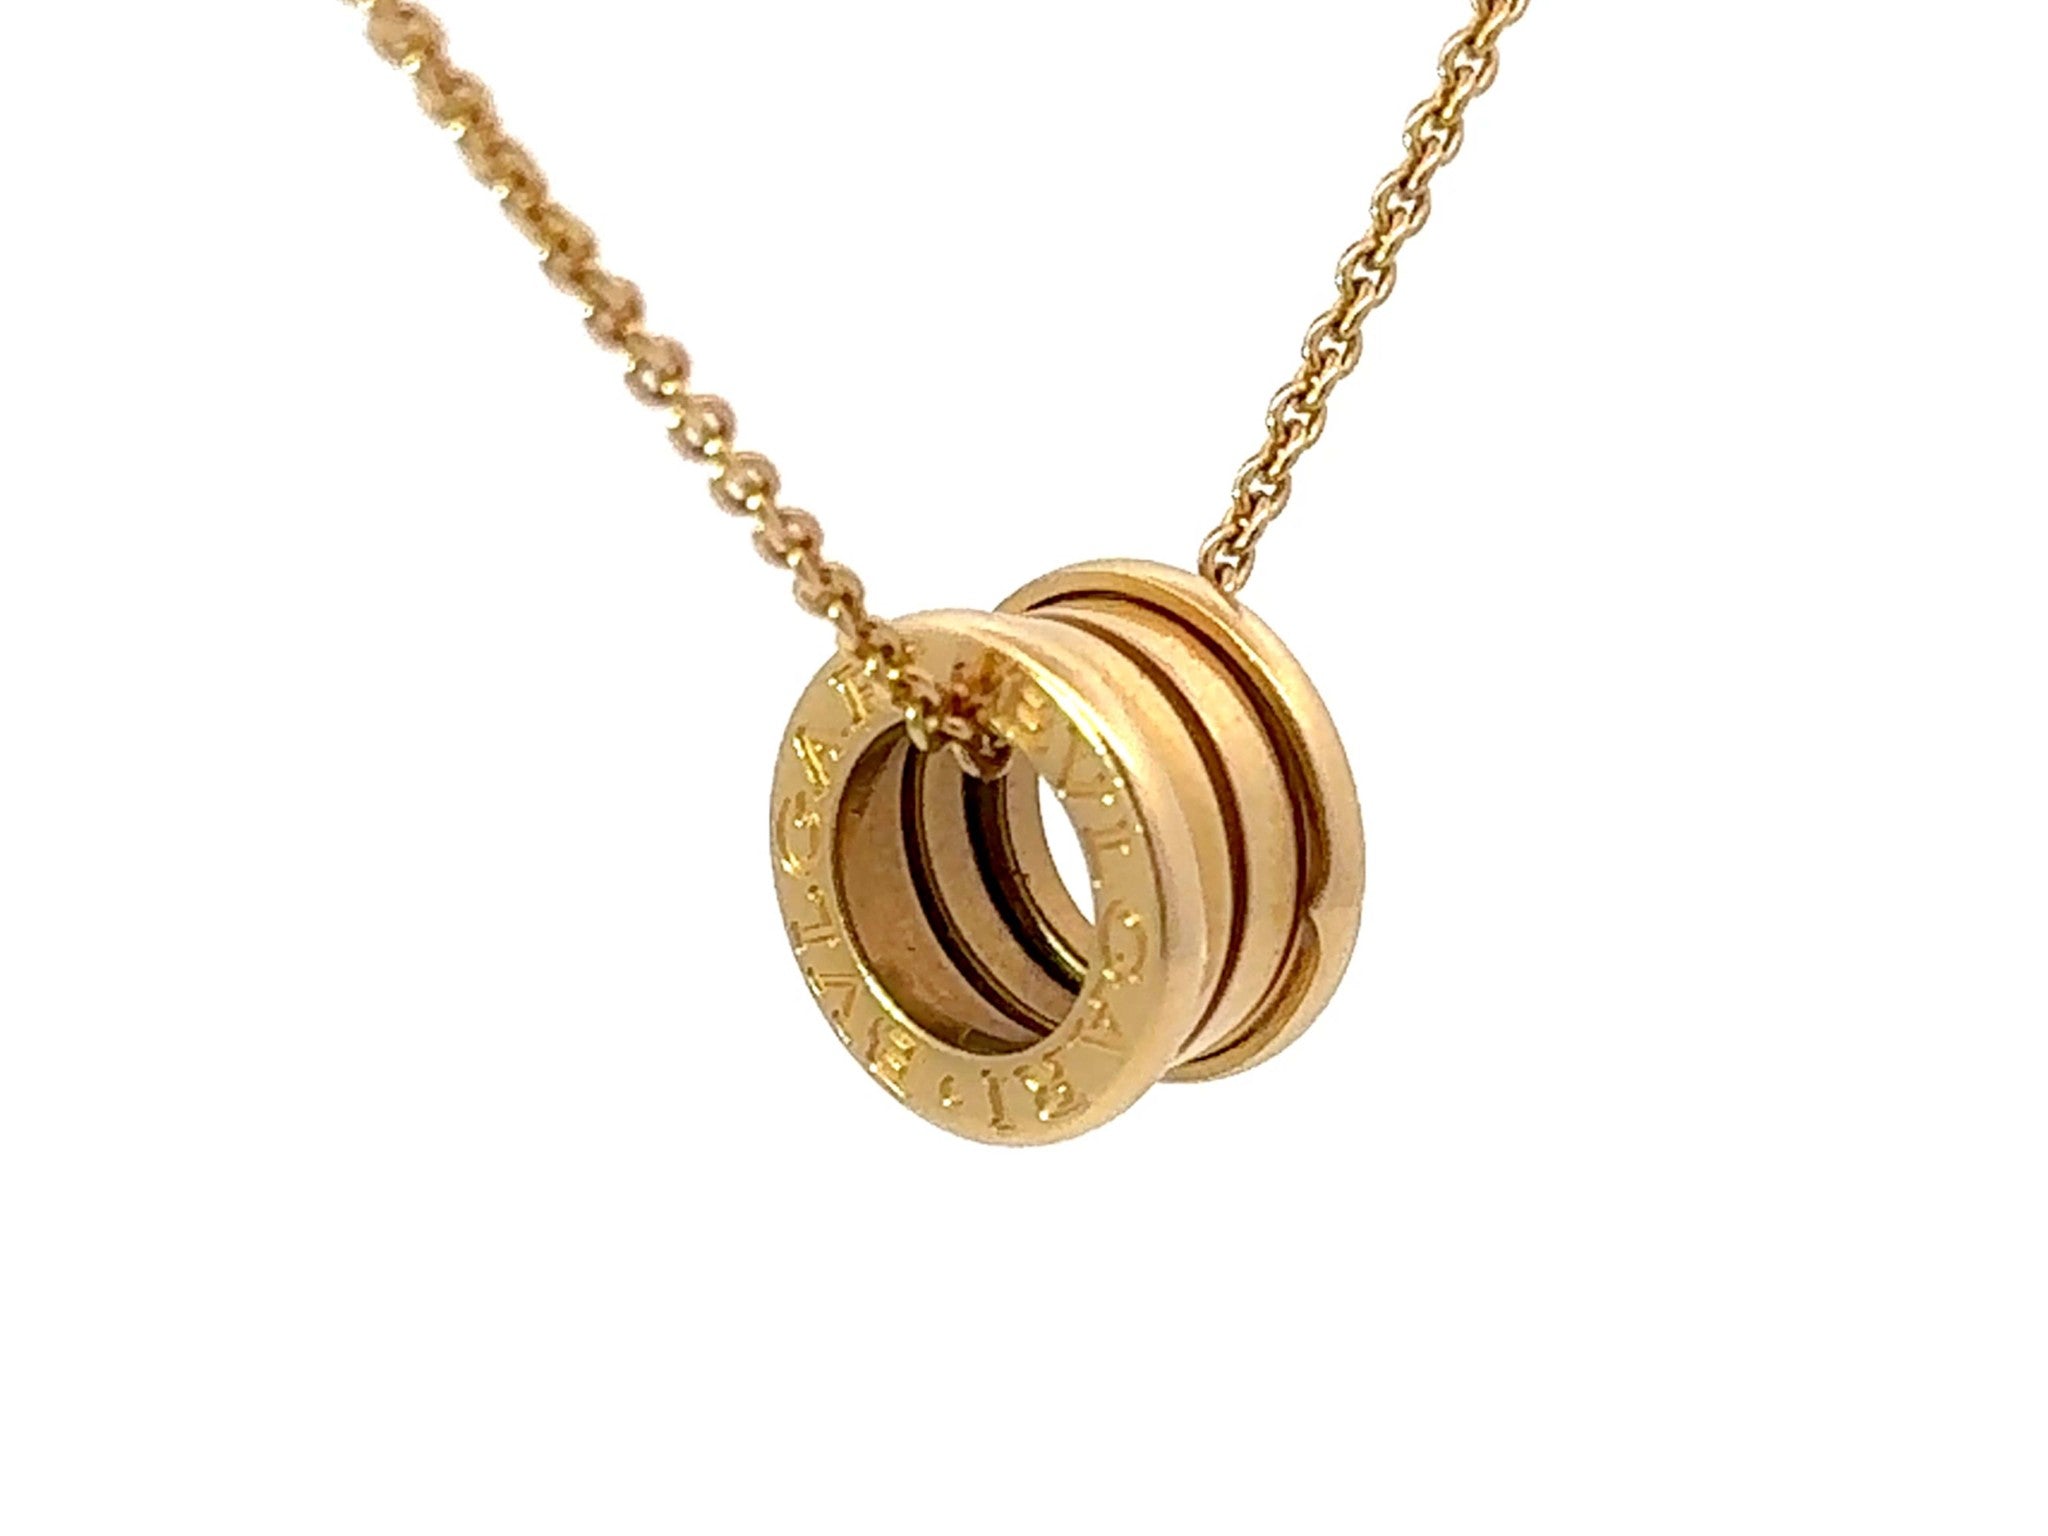 BVLGARI B.ZERO1 Necklace 18k Yellow Gold With Box and Papers